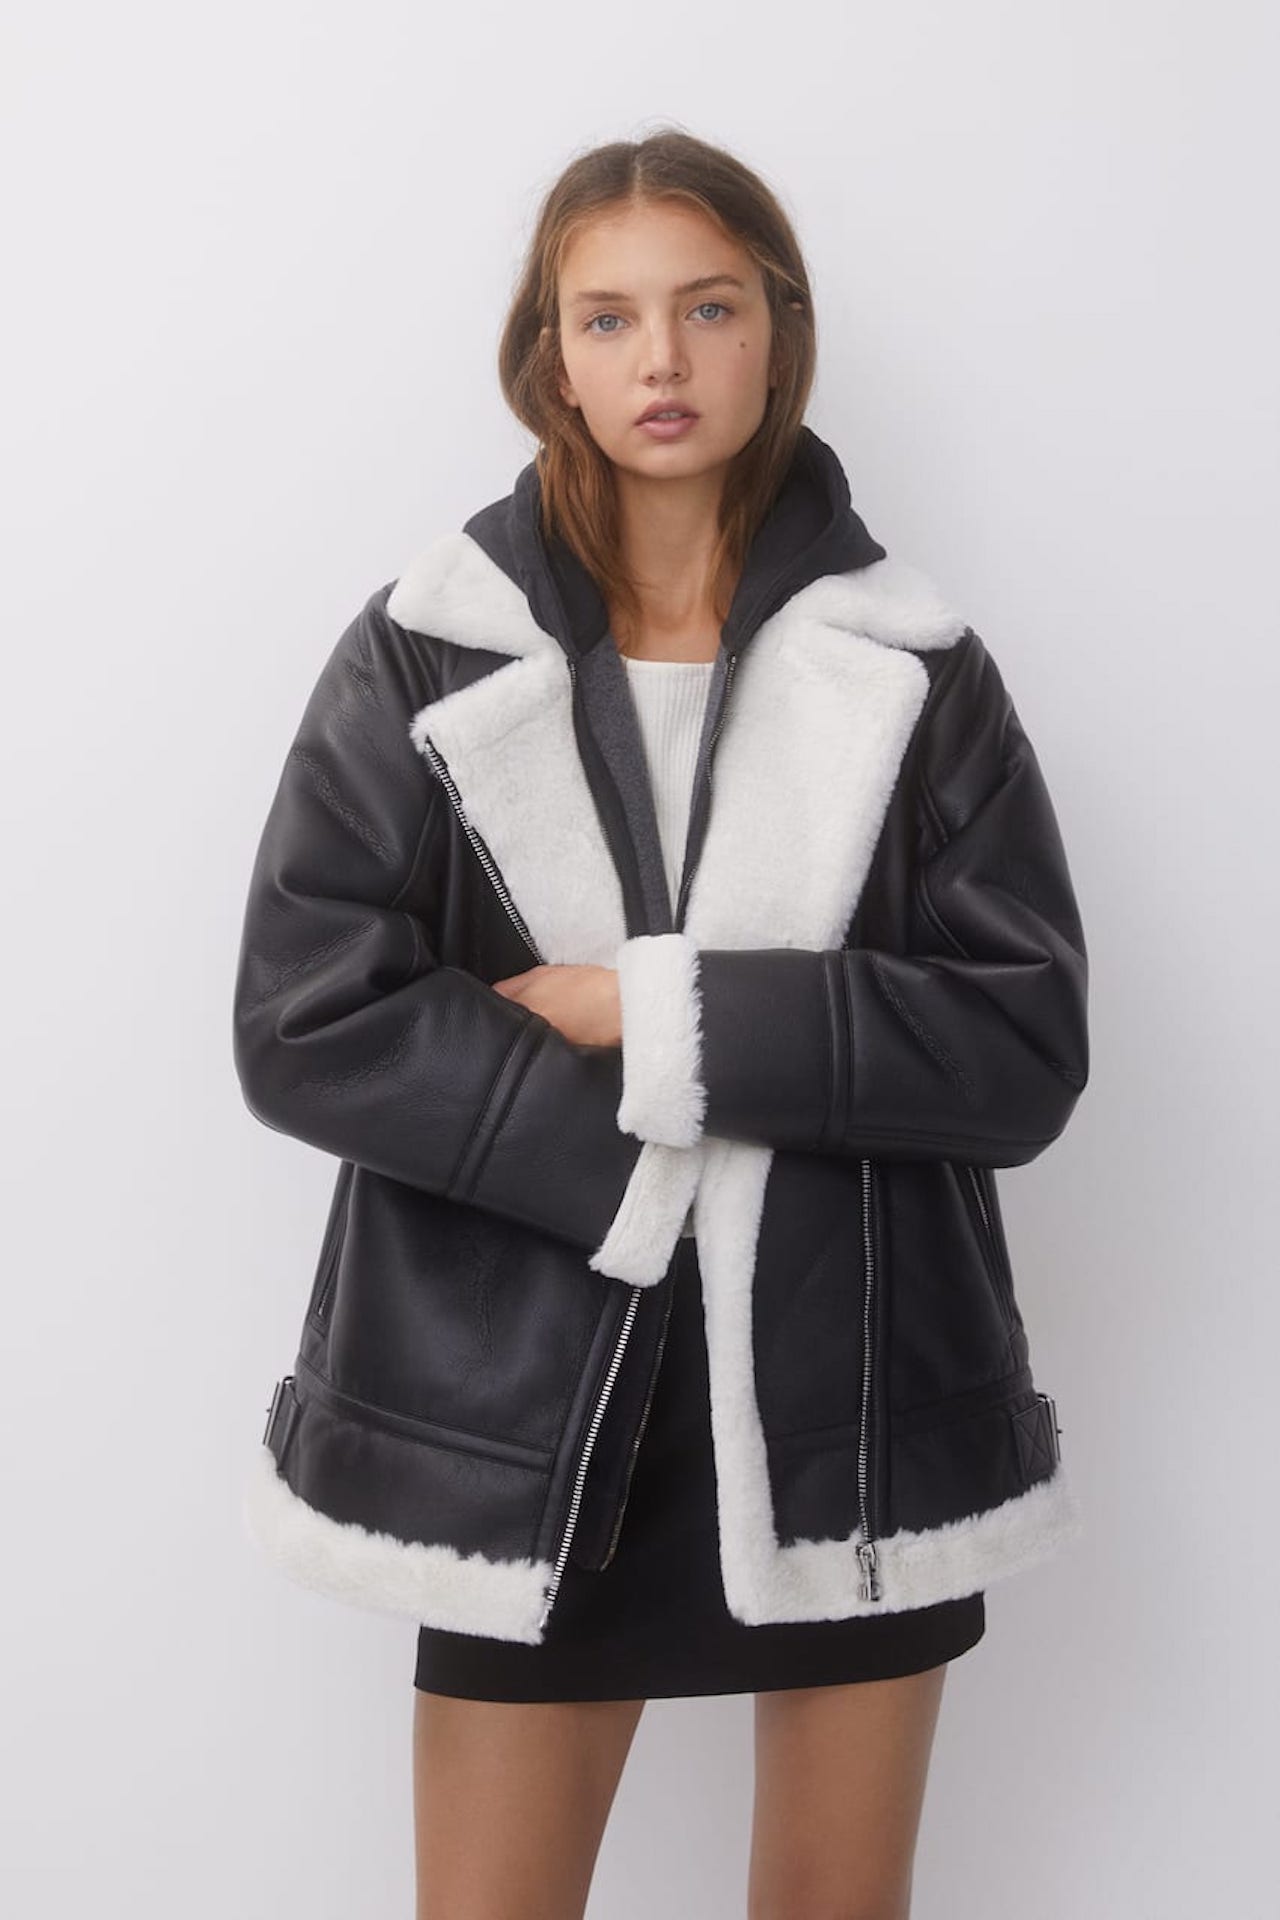 Stay Cozy Chic With These 8 Winter Coats Under $150